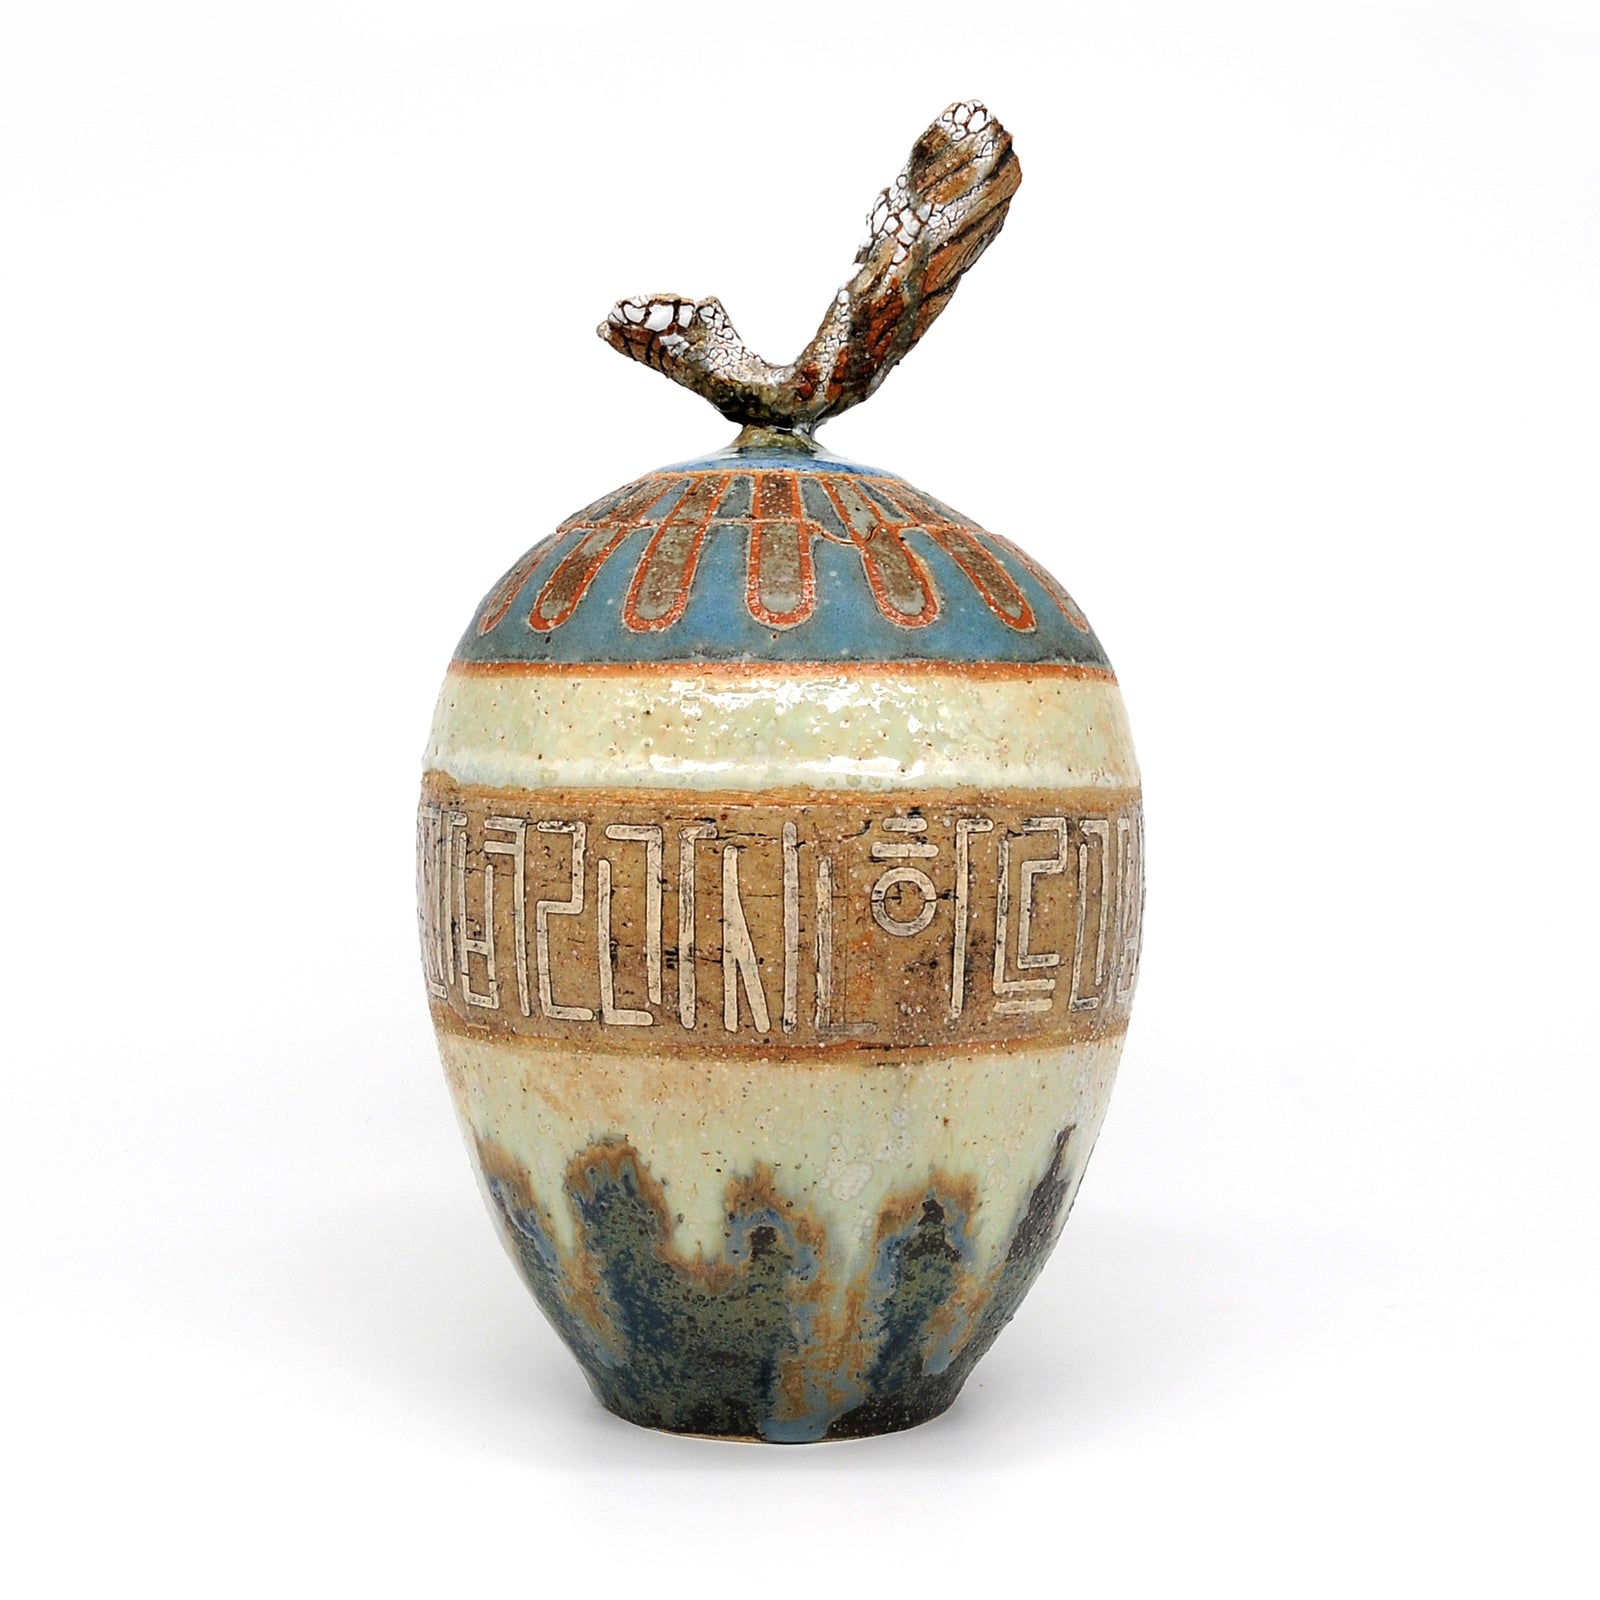 'MK17 Large Lava Jar’ by Miae Kim ceramics, available at Padstow Gallery, Cornwall